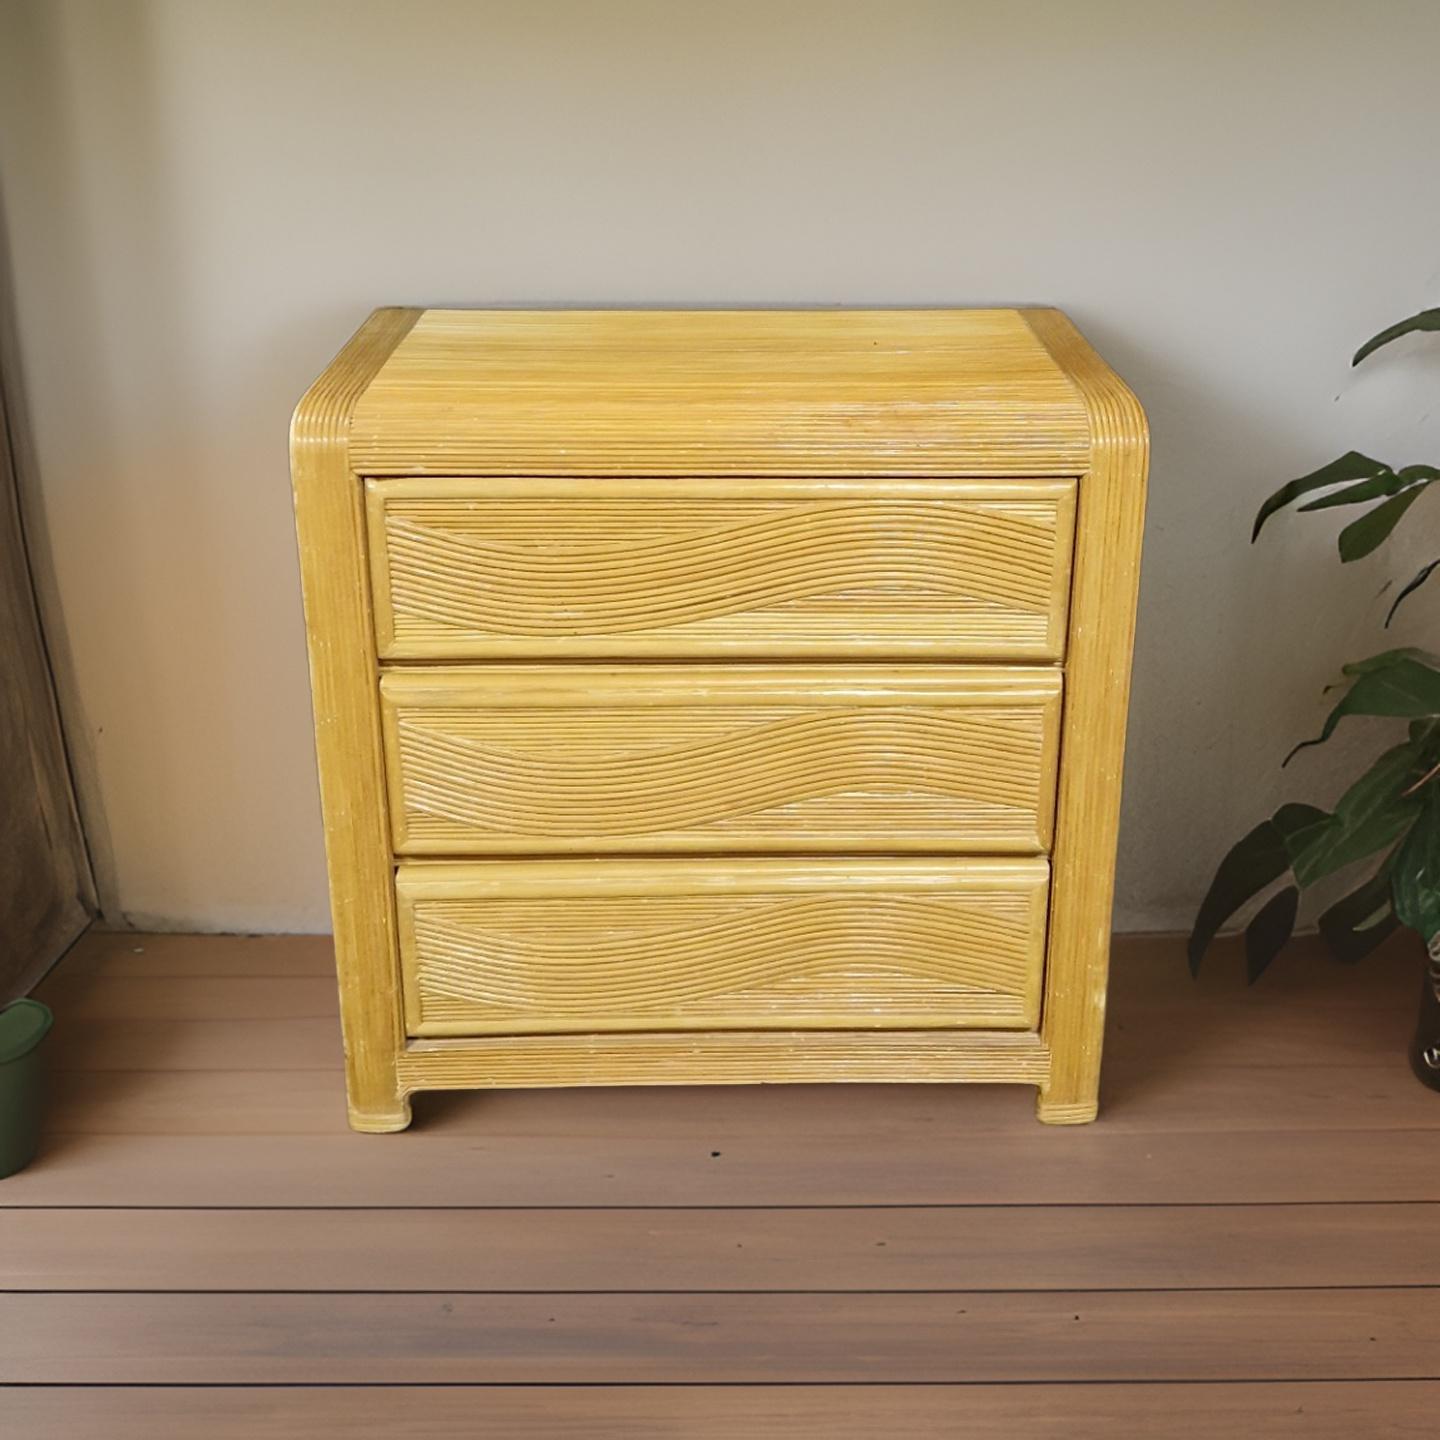 1970s chest of drawers. Made from wood and pencil reed. Sculptural design with beautiful waving decor on the drawer fronts. Made in Belgium by Rietshop Zonhoven, a reed weaver shop in Belgium. 
Skillfully made piece. The drawers have hidden handles